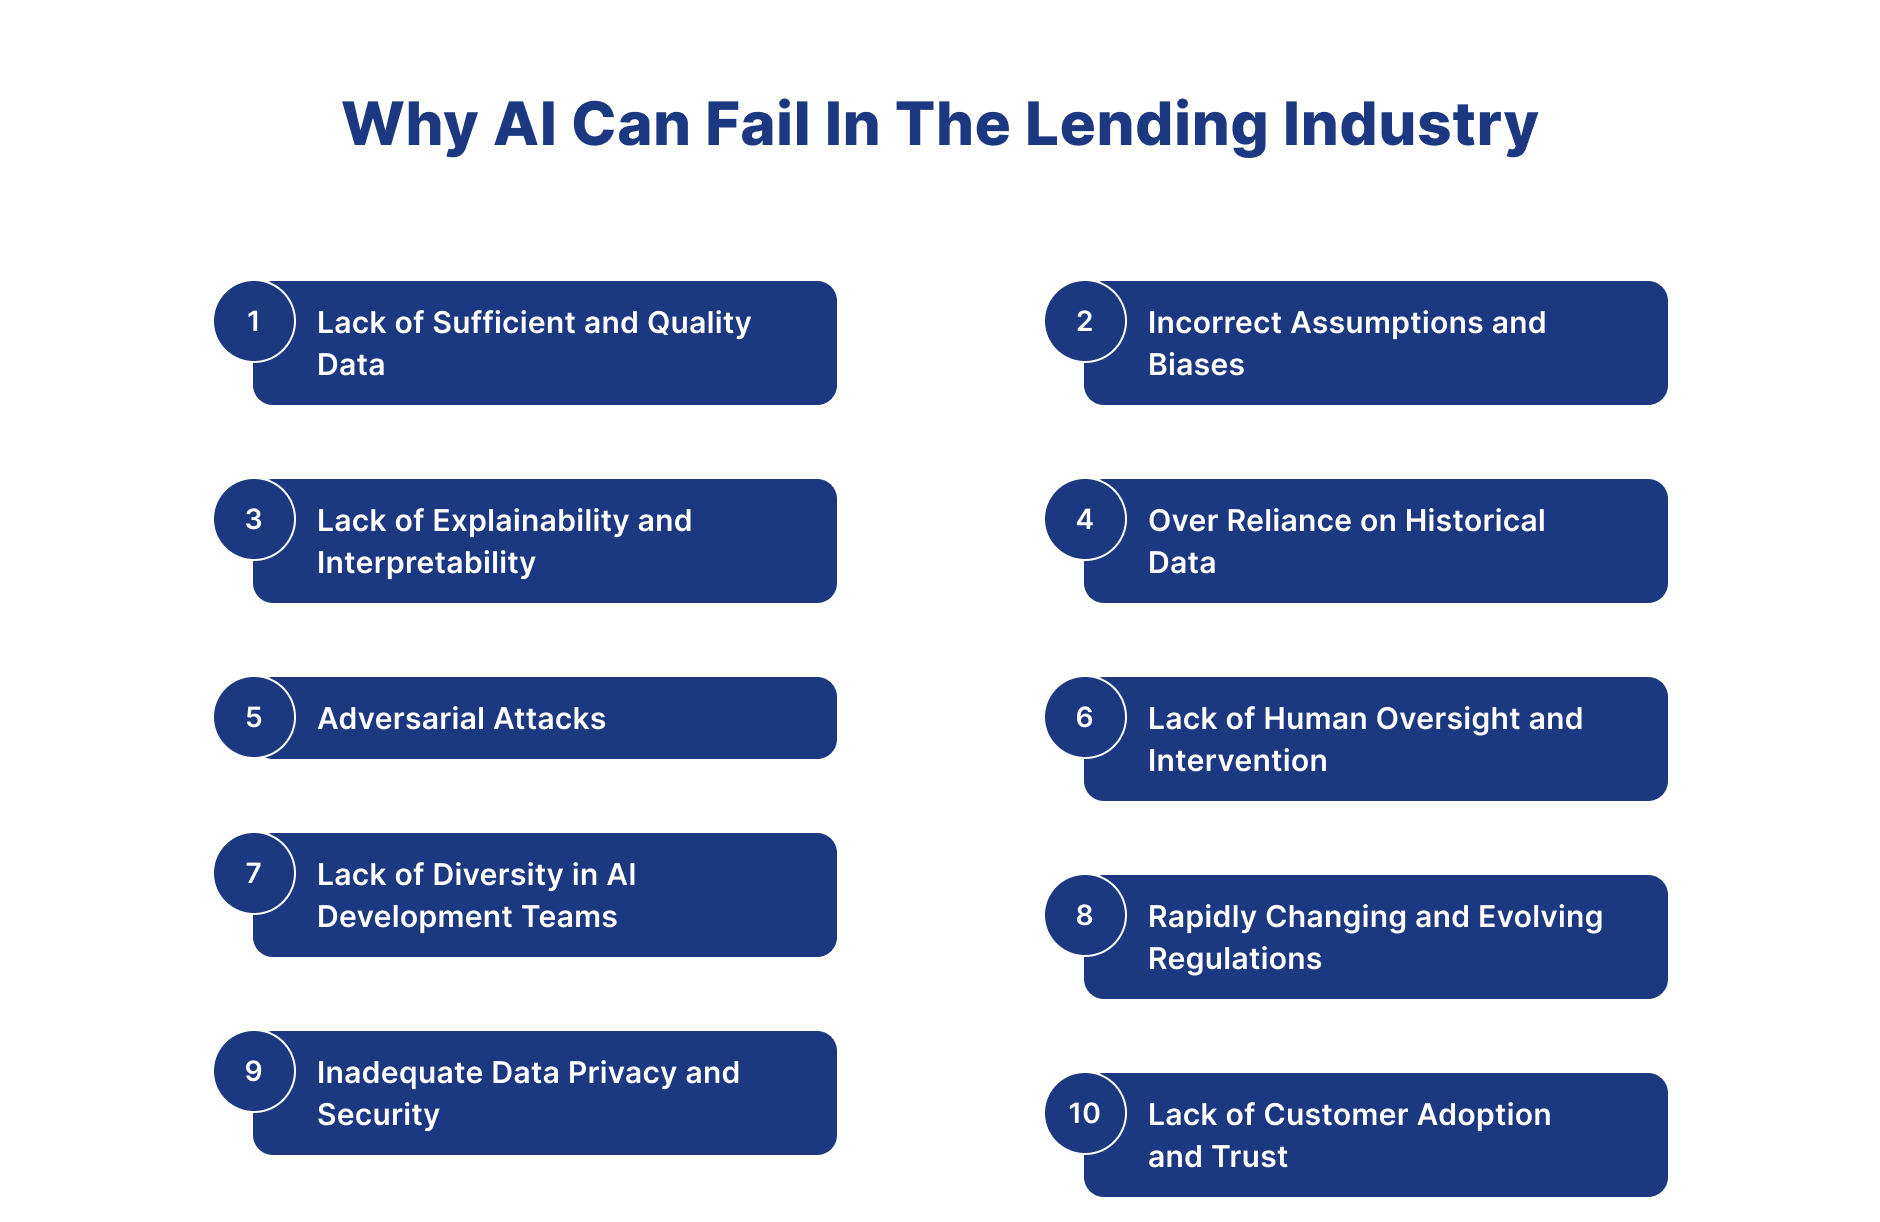 AI Can Fail in the Lending Industry